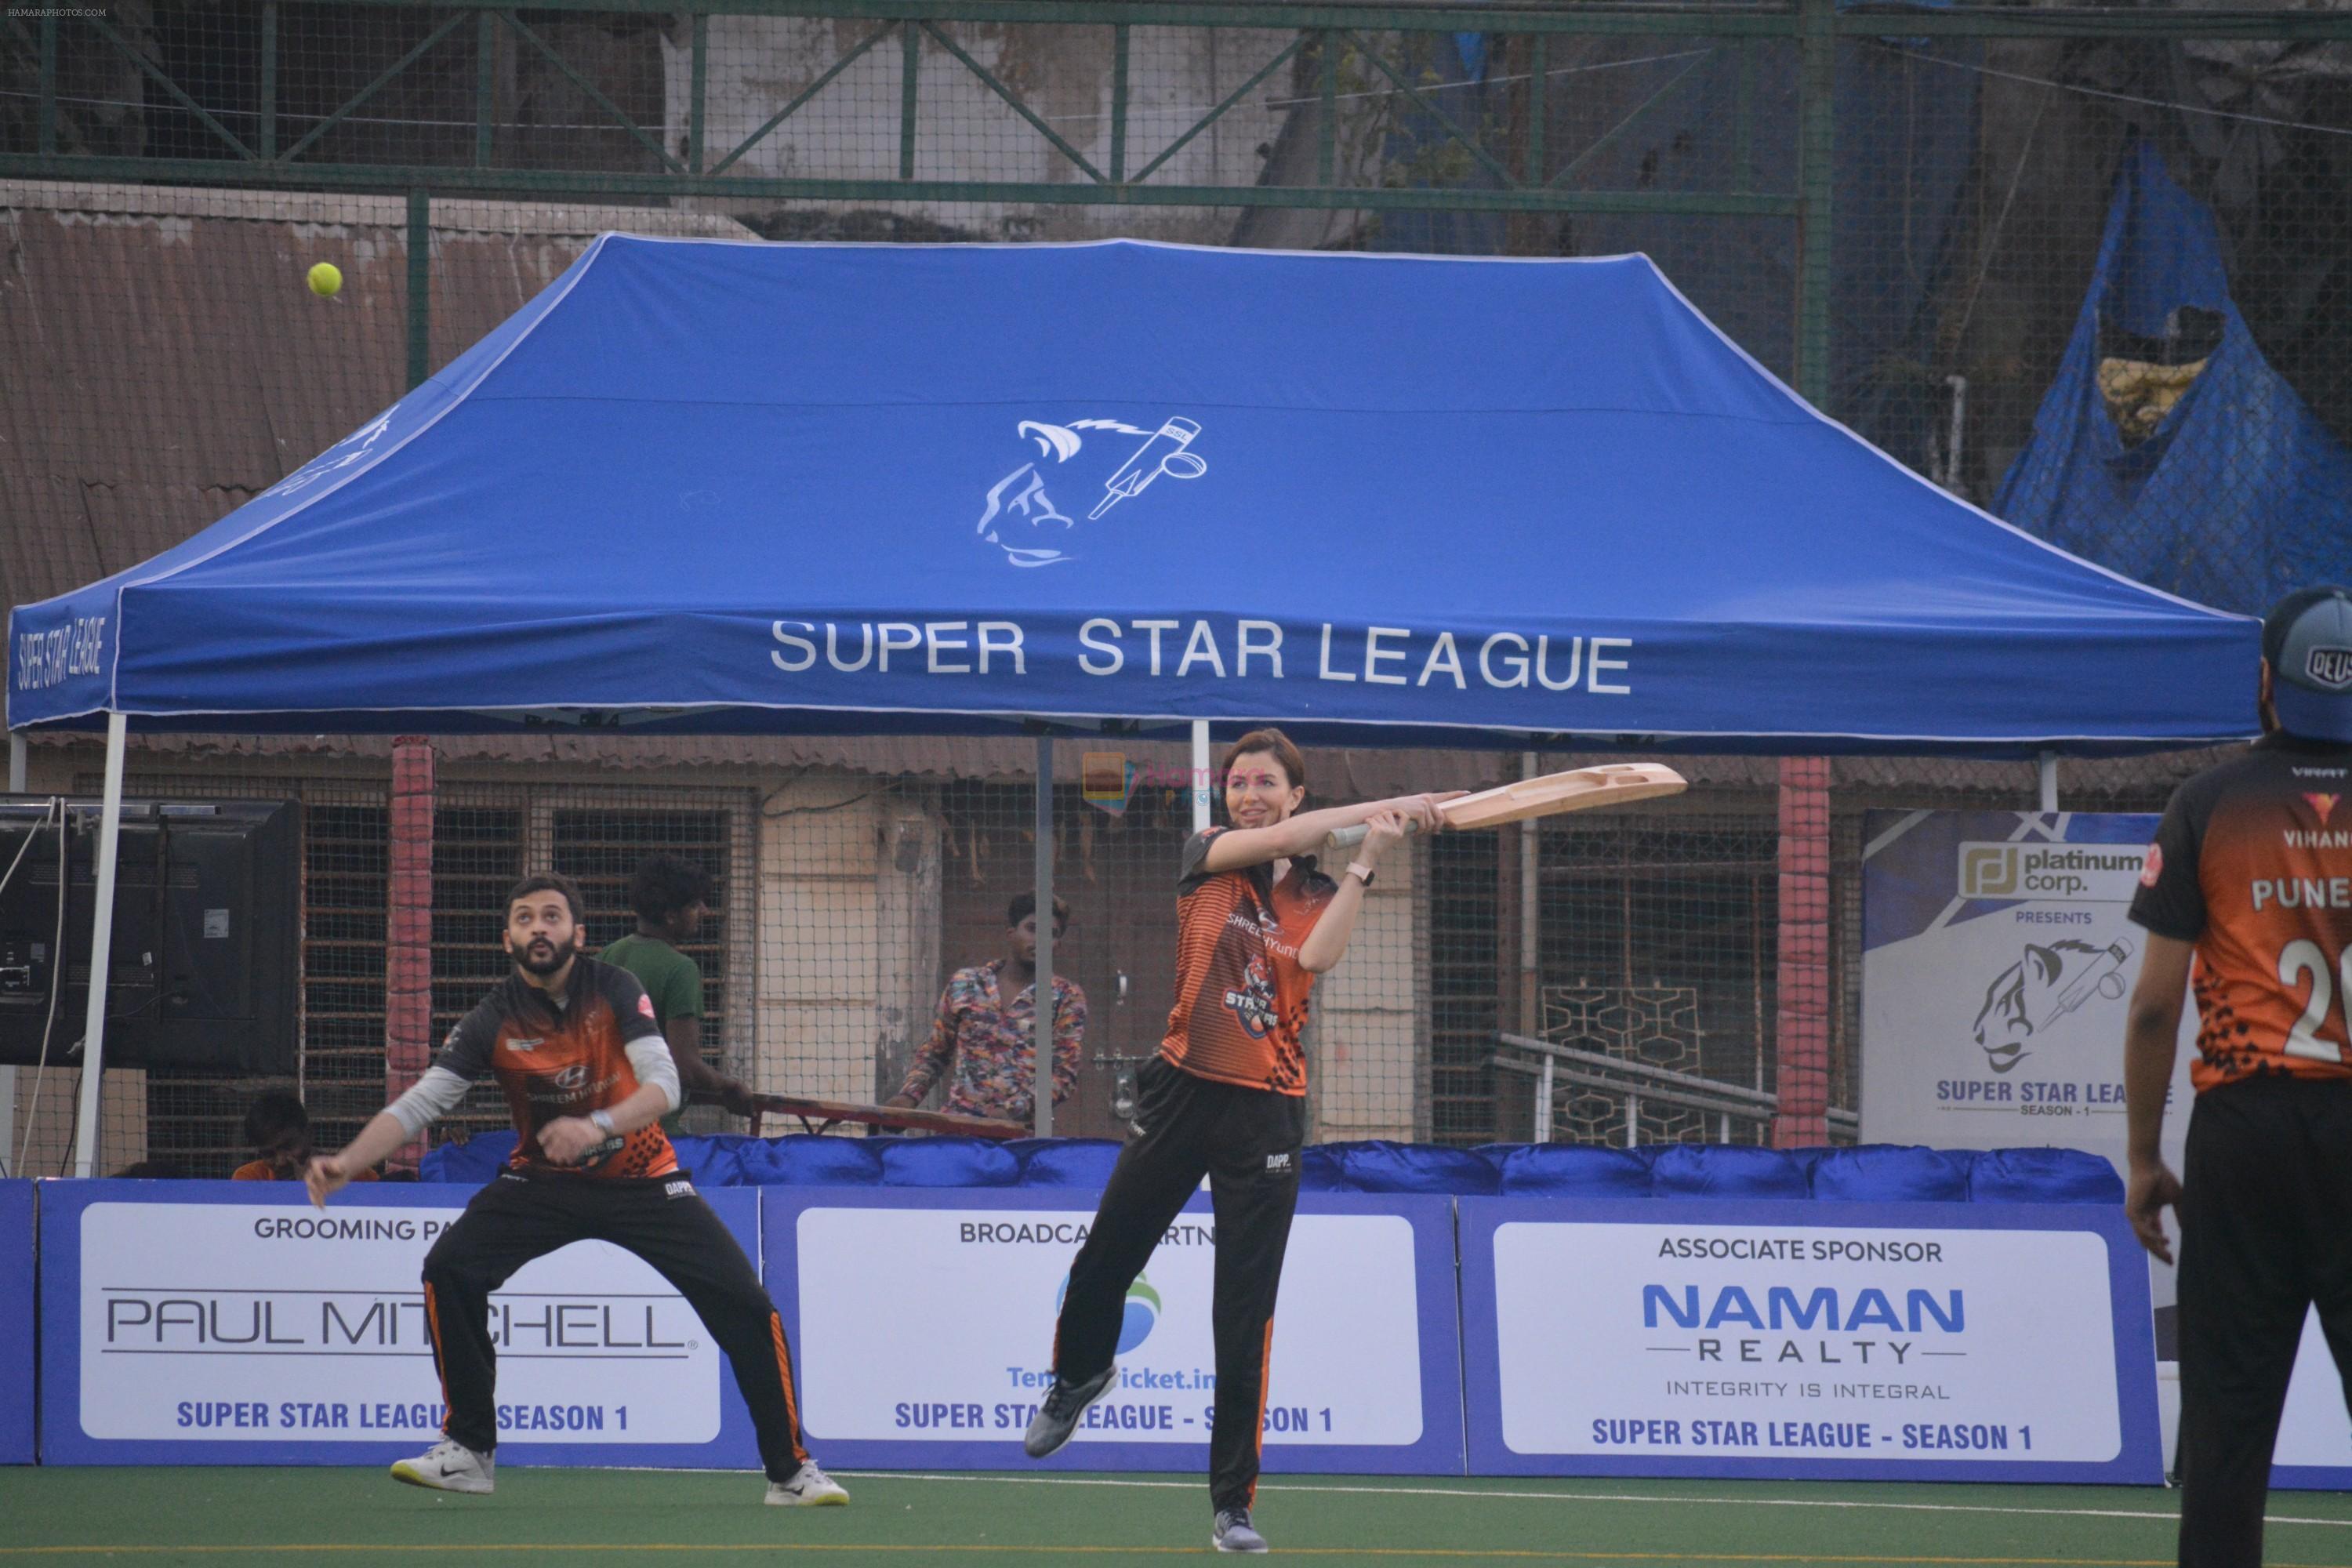 during The Inaugural Match Of Super Star League At Bandra on 7th Jan 2019